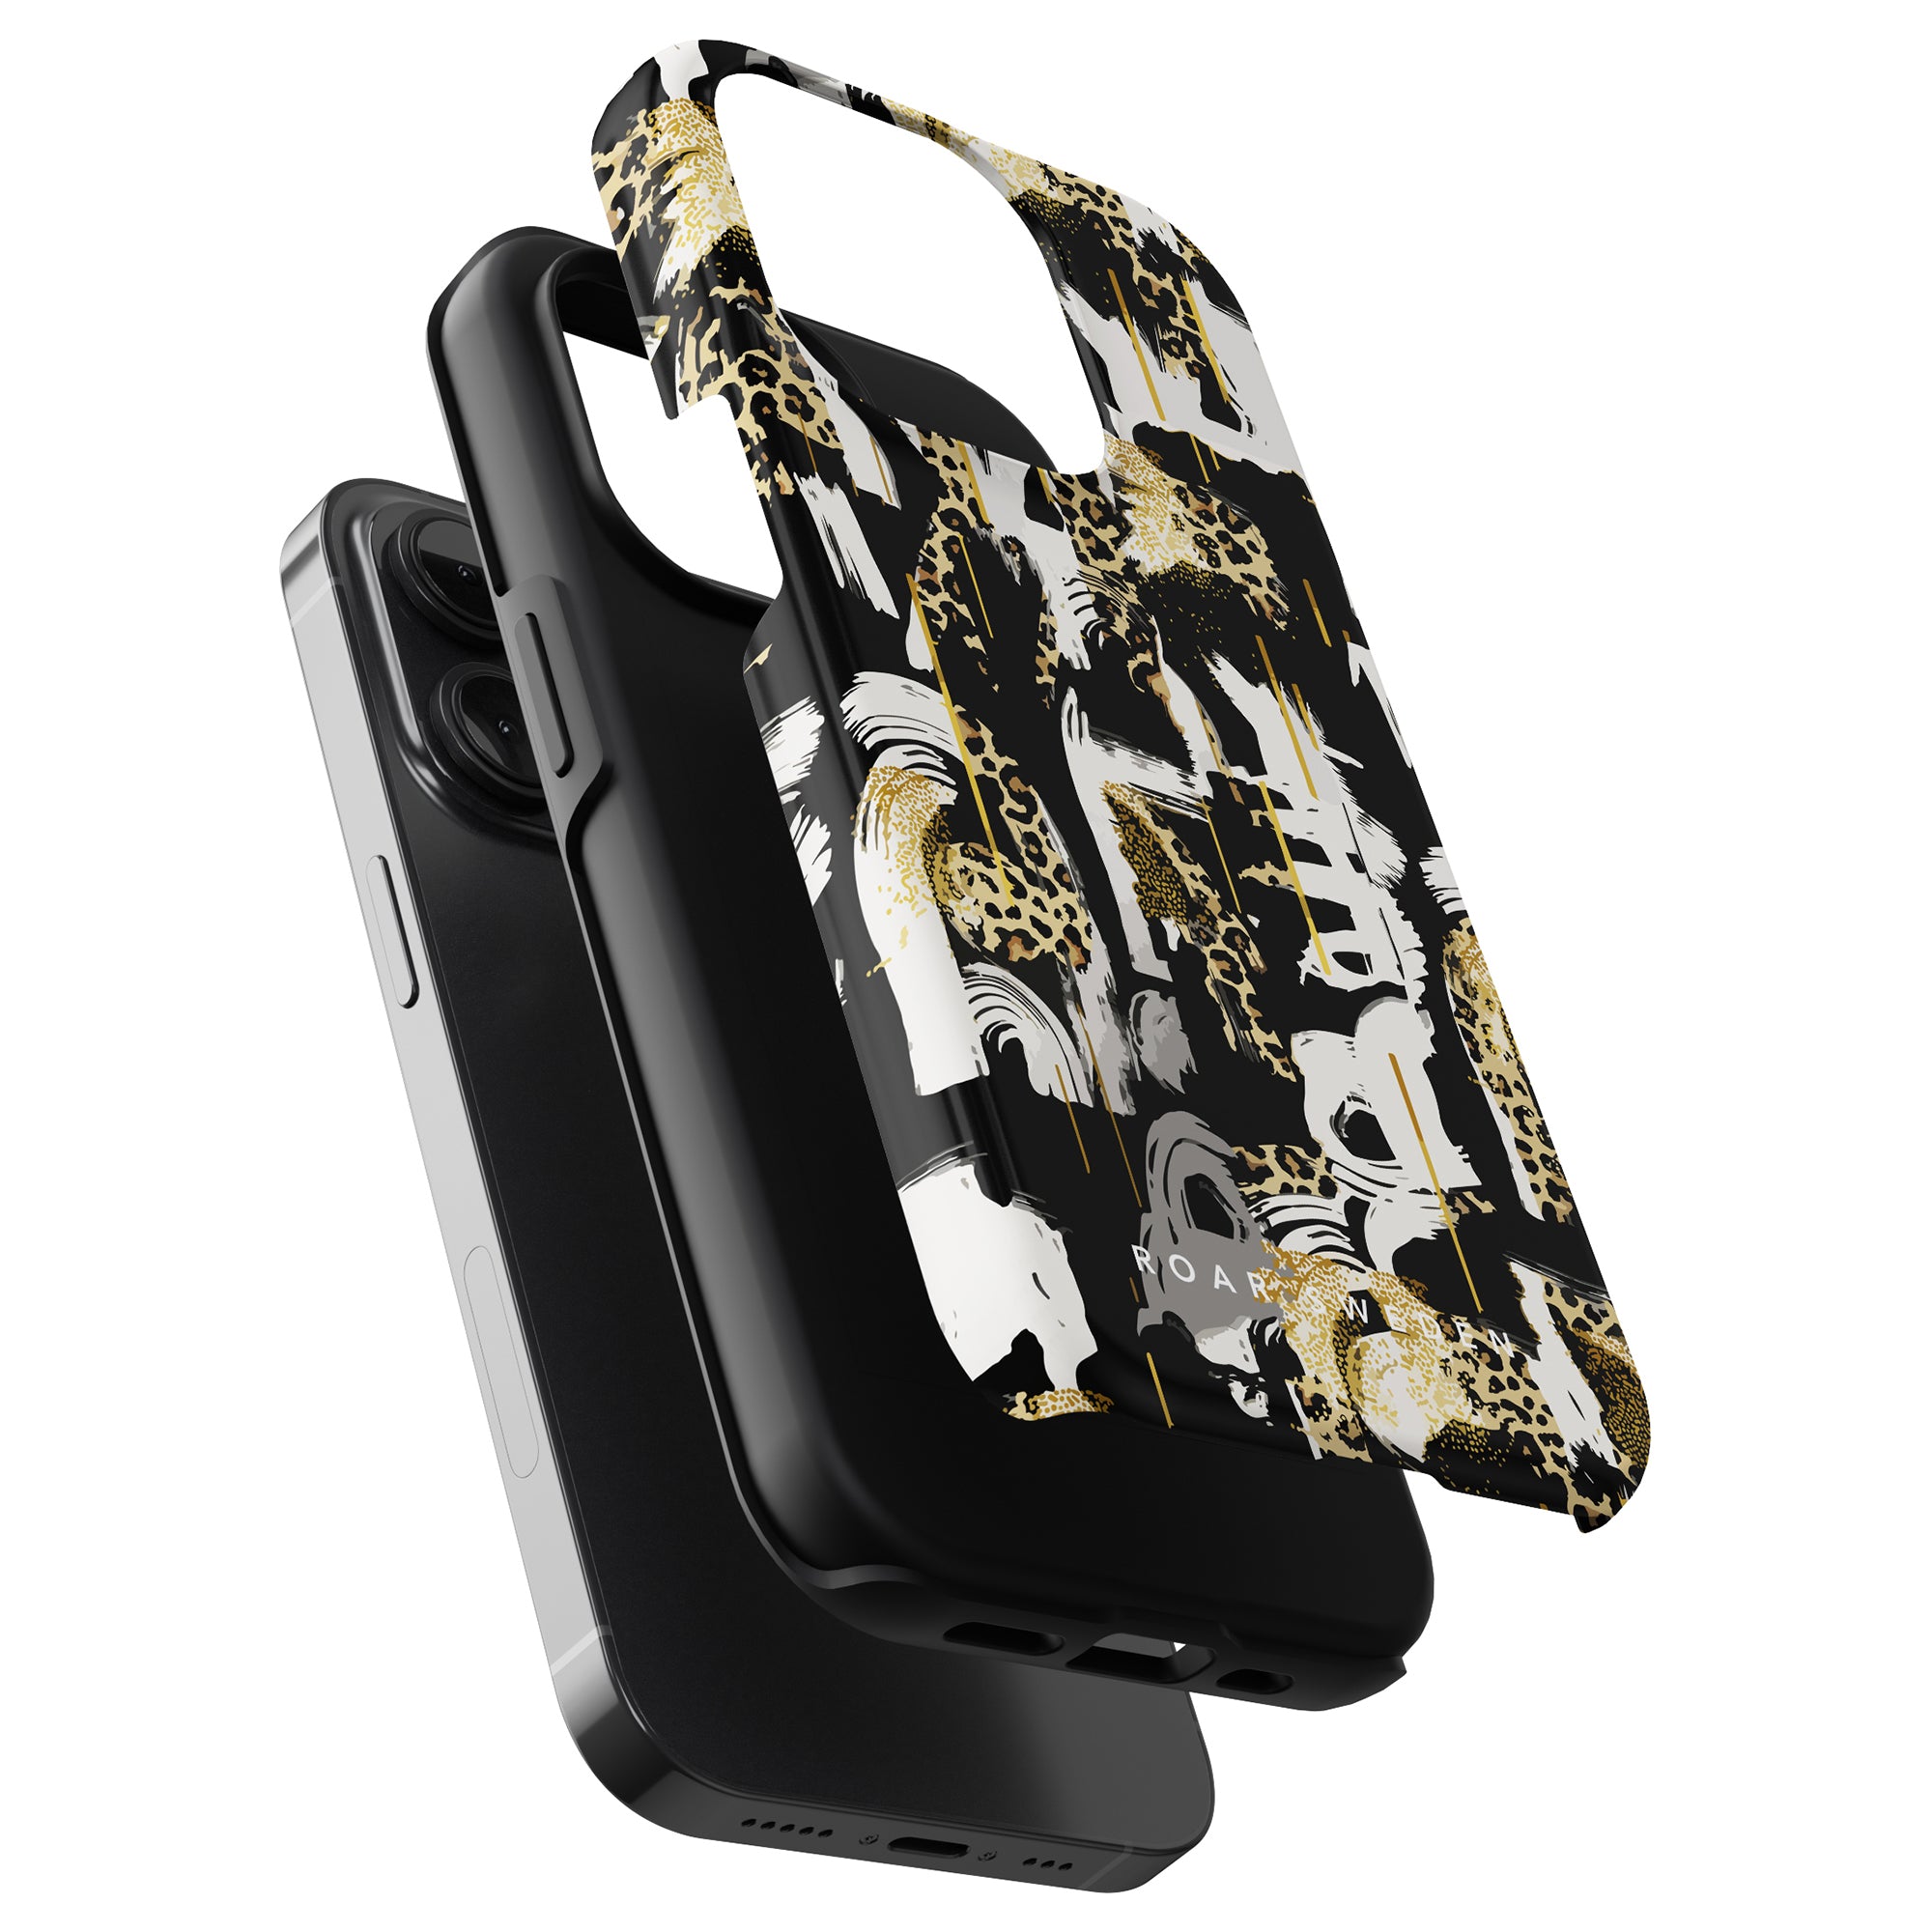 Two Skate Leo - Tough Cases, one showcasing a leopard print design, displayed against a white background.